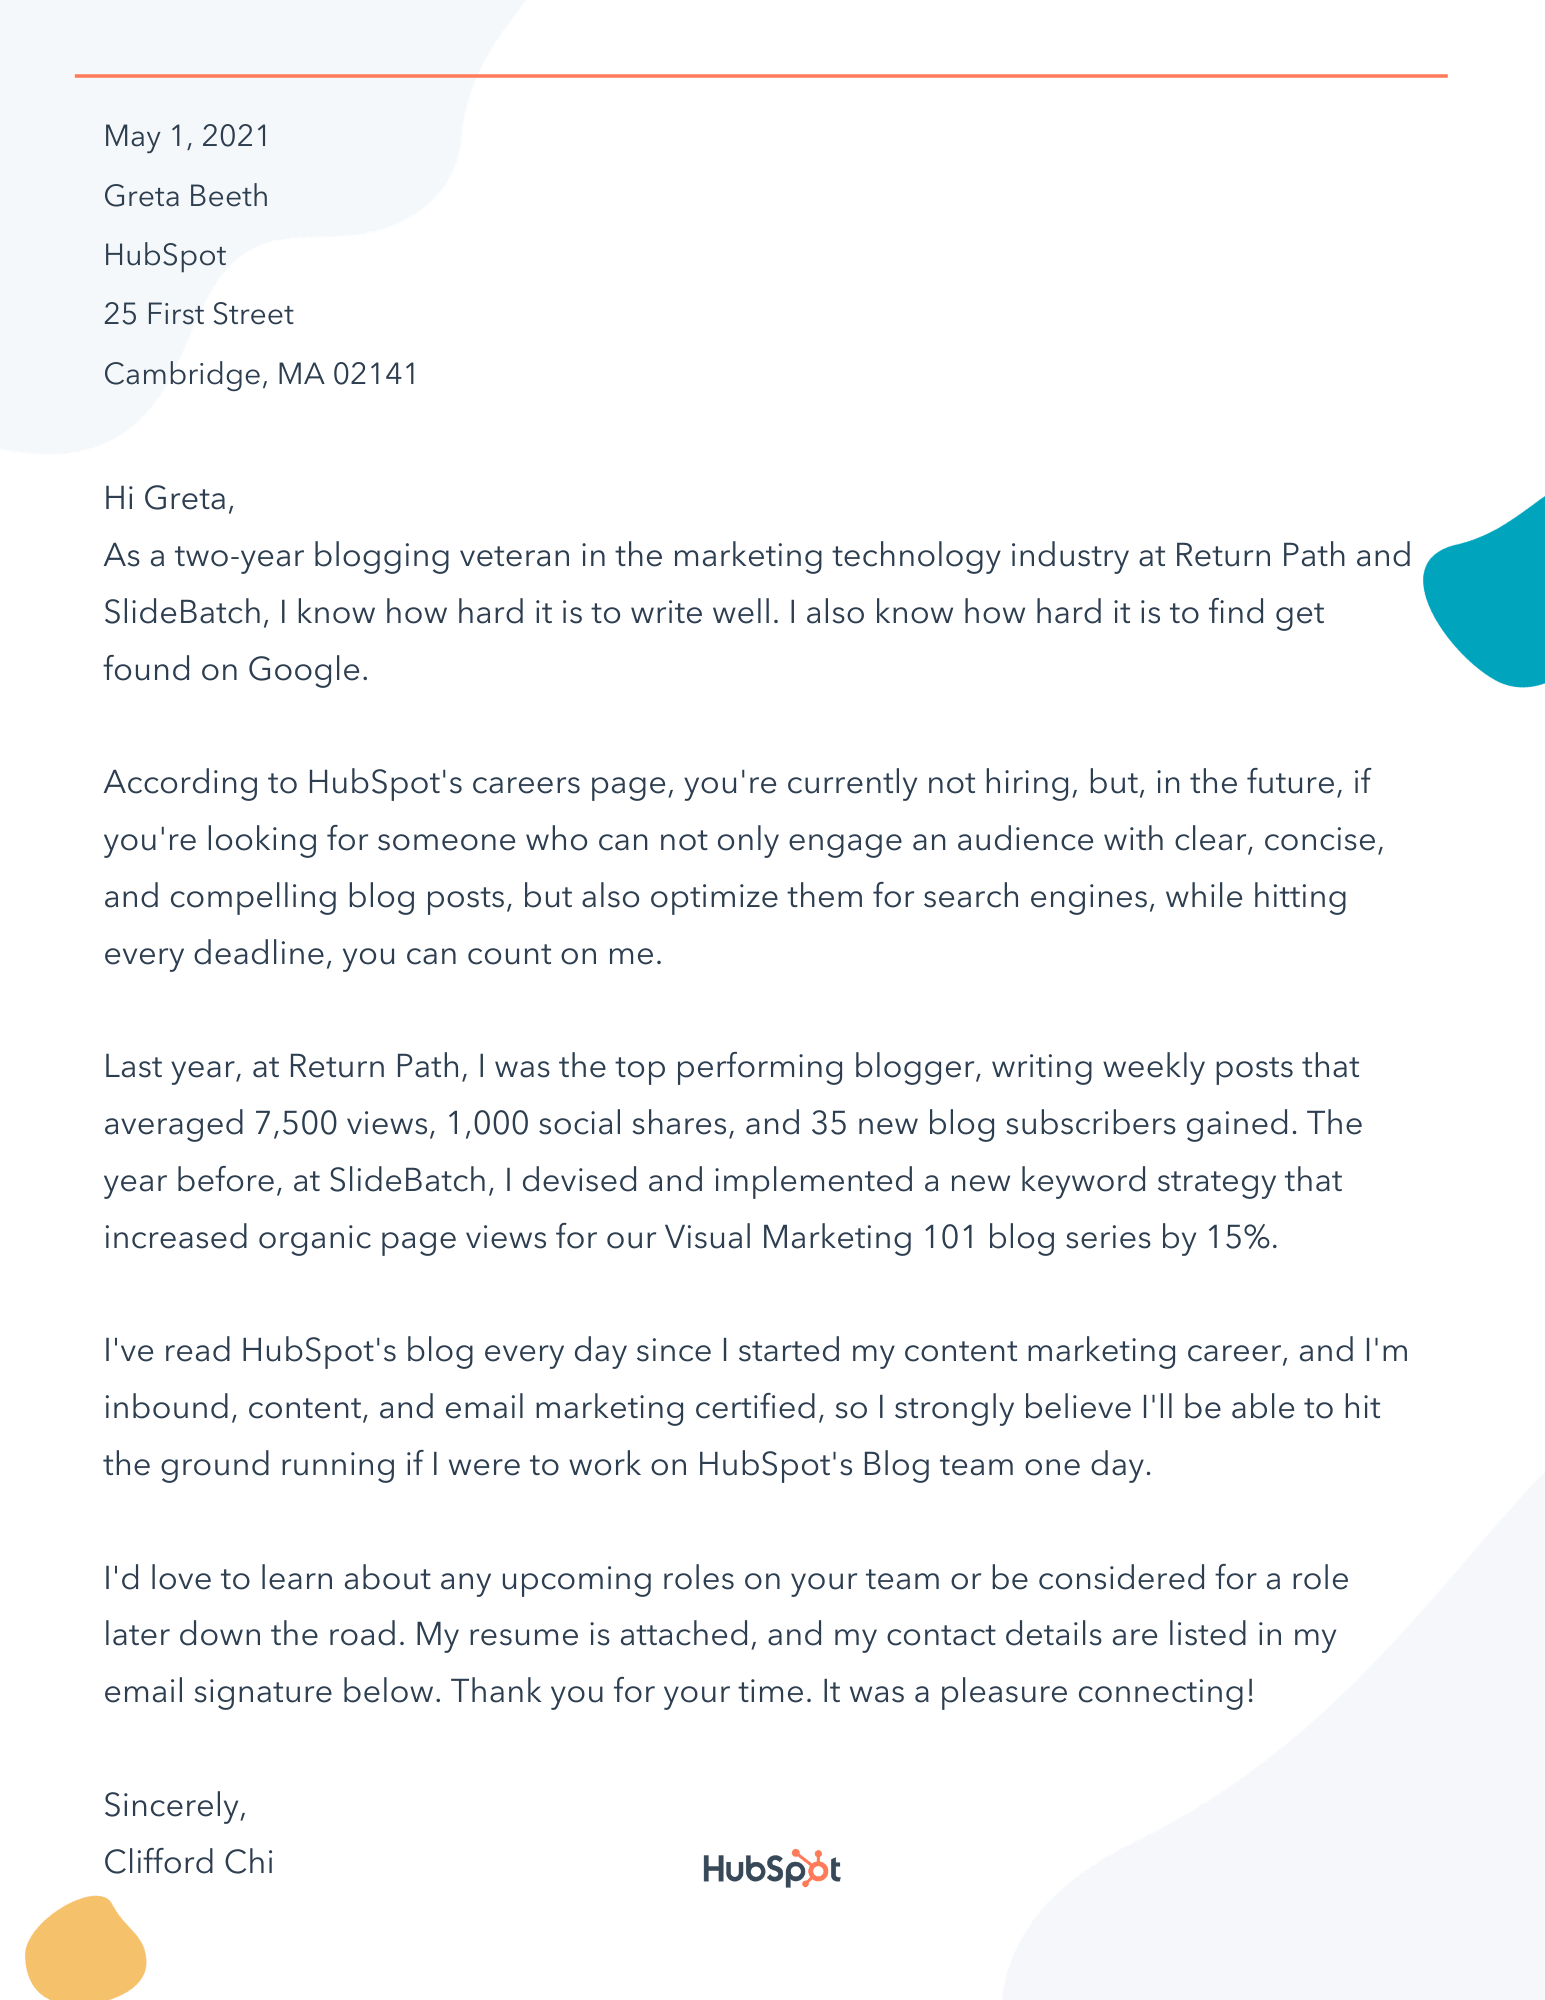 How to Write a Letter of Interest in 18 [Examples + Template]